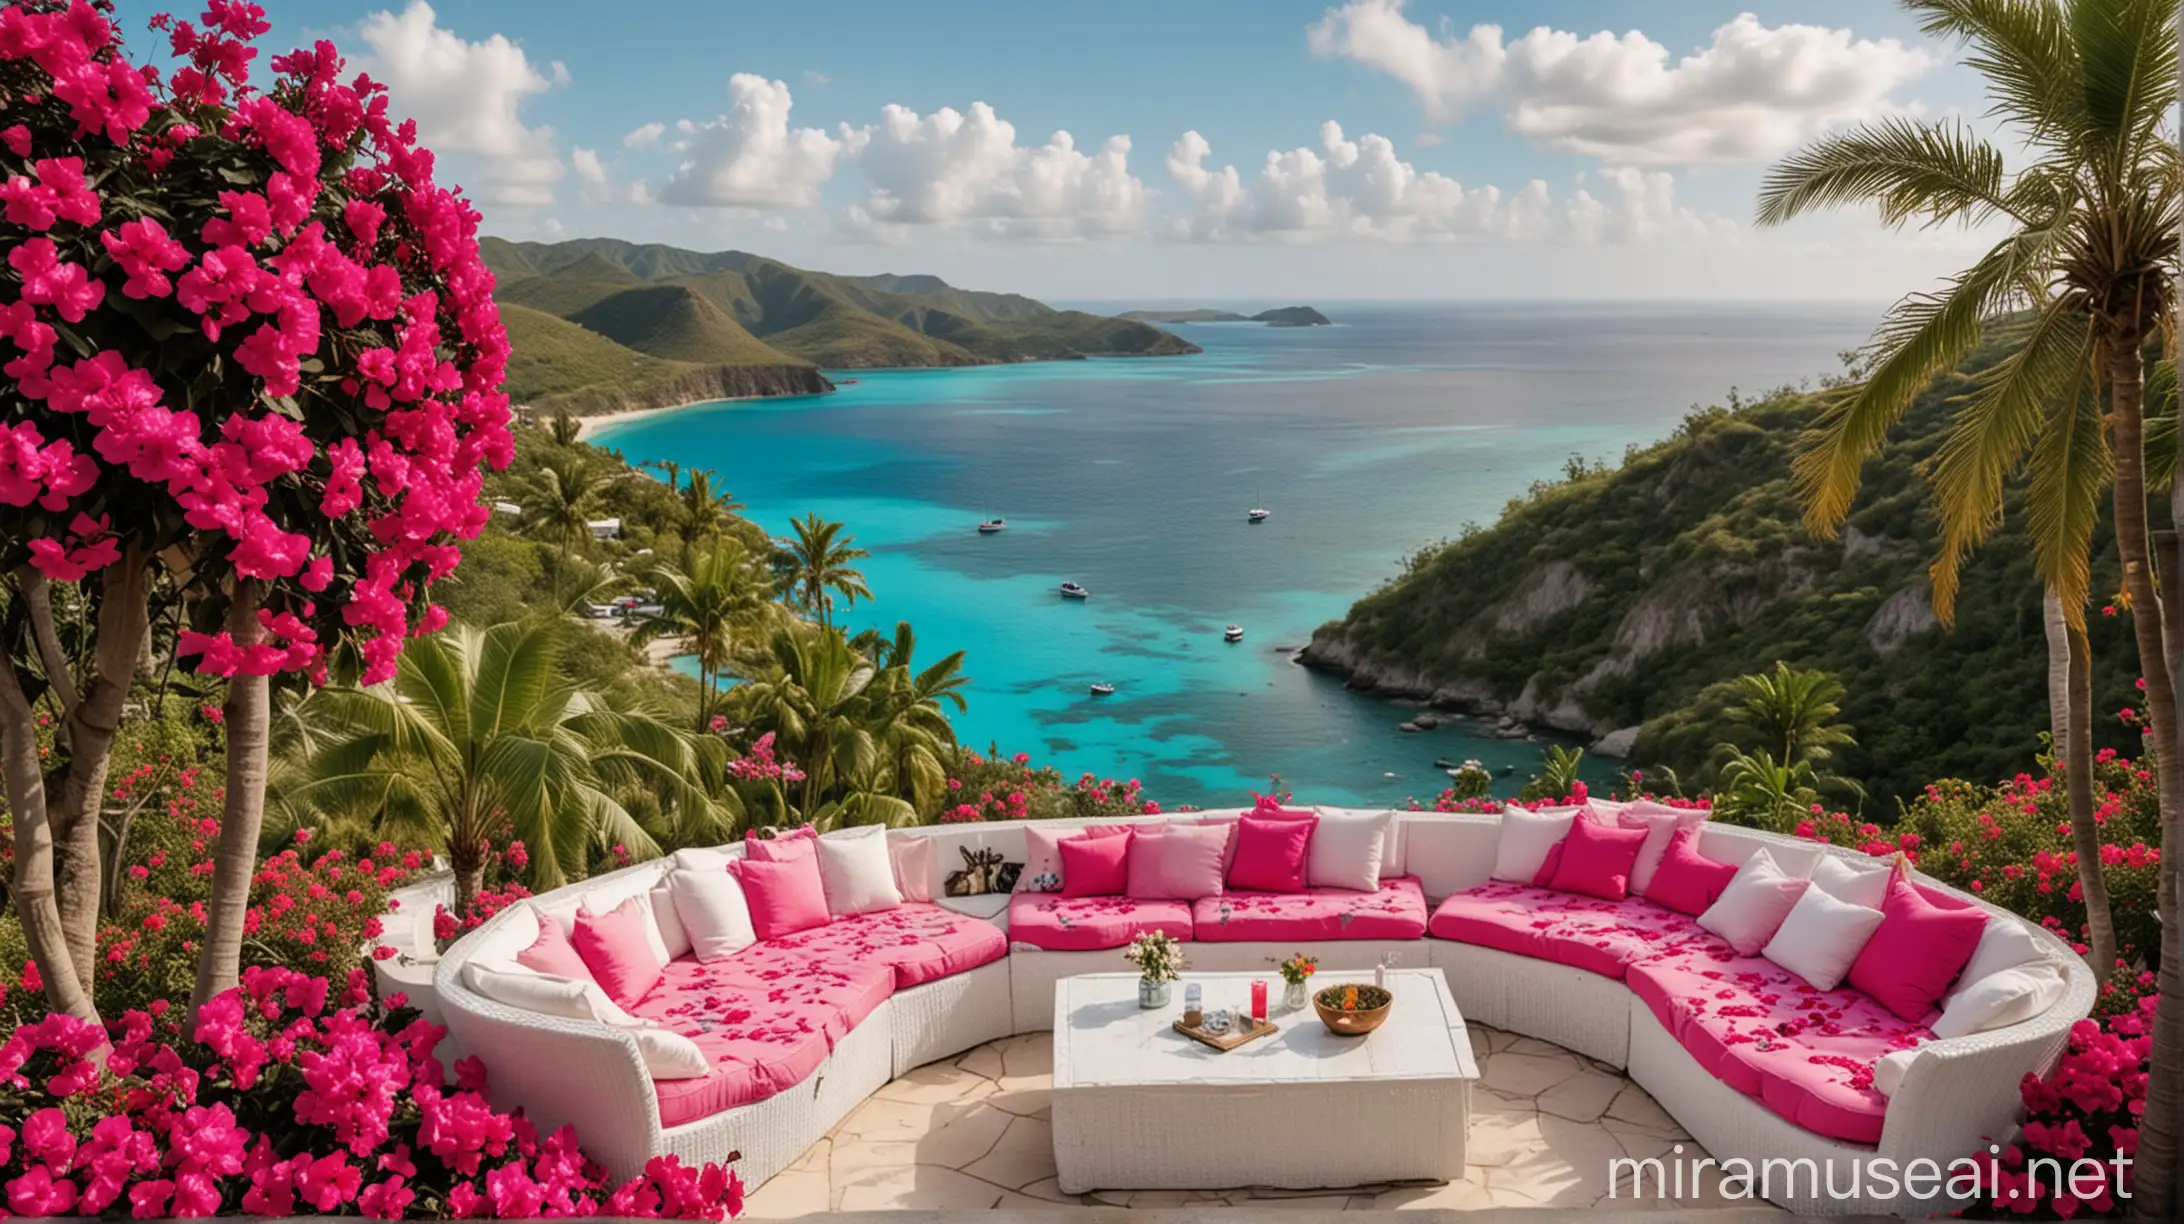 wide, panoramic shot captured with a drone camera, showcasing a bohemian-style lounge area on a high hilltop overlooking a turquoise lagoon. Lush palm trees and vibrant pink bougainvillea create a vibrant backdrop, while white wicker furniture and colorful cushions invite relaxation.